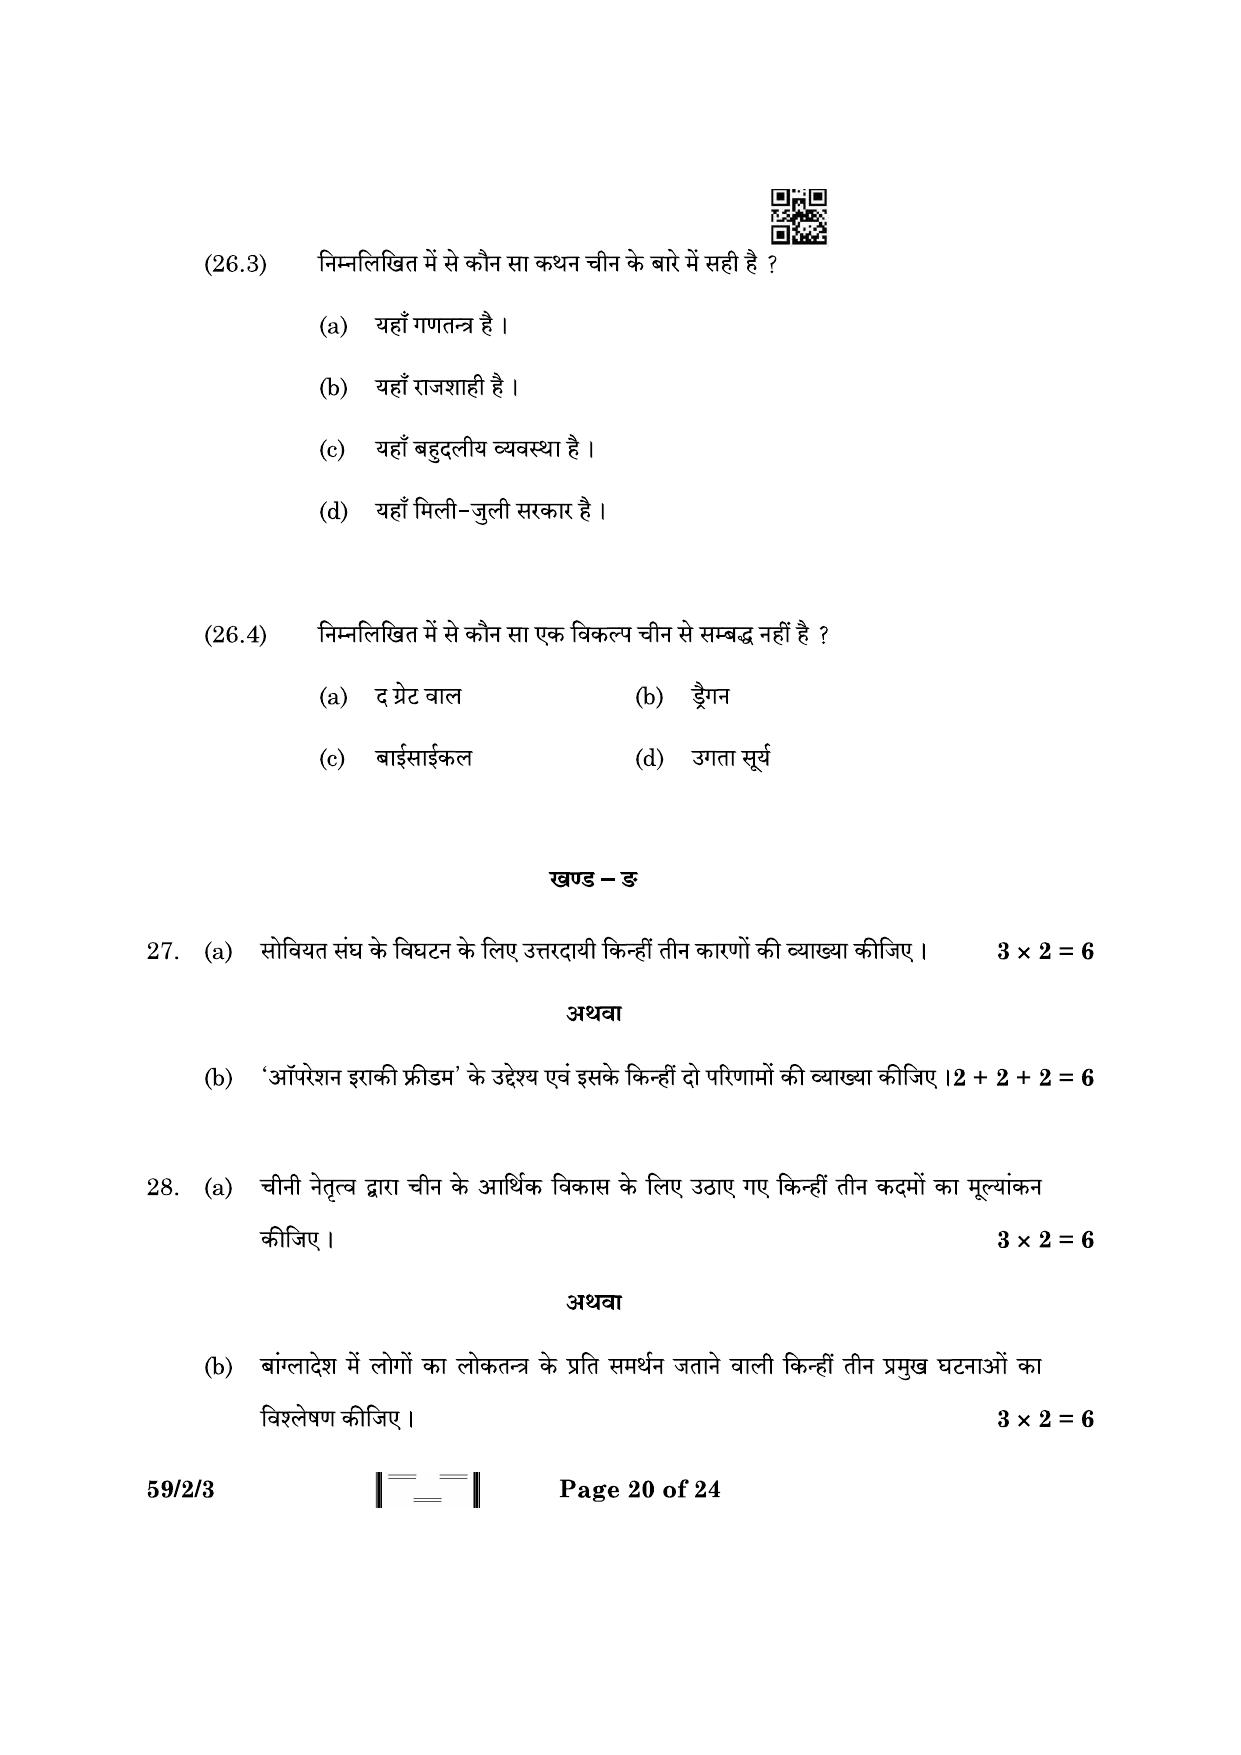 CBSE Class 12 59-2-3 Political Science 2023 Question Paper - Page 20